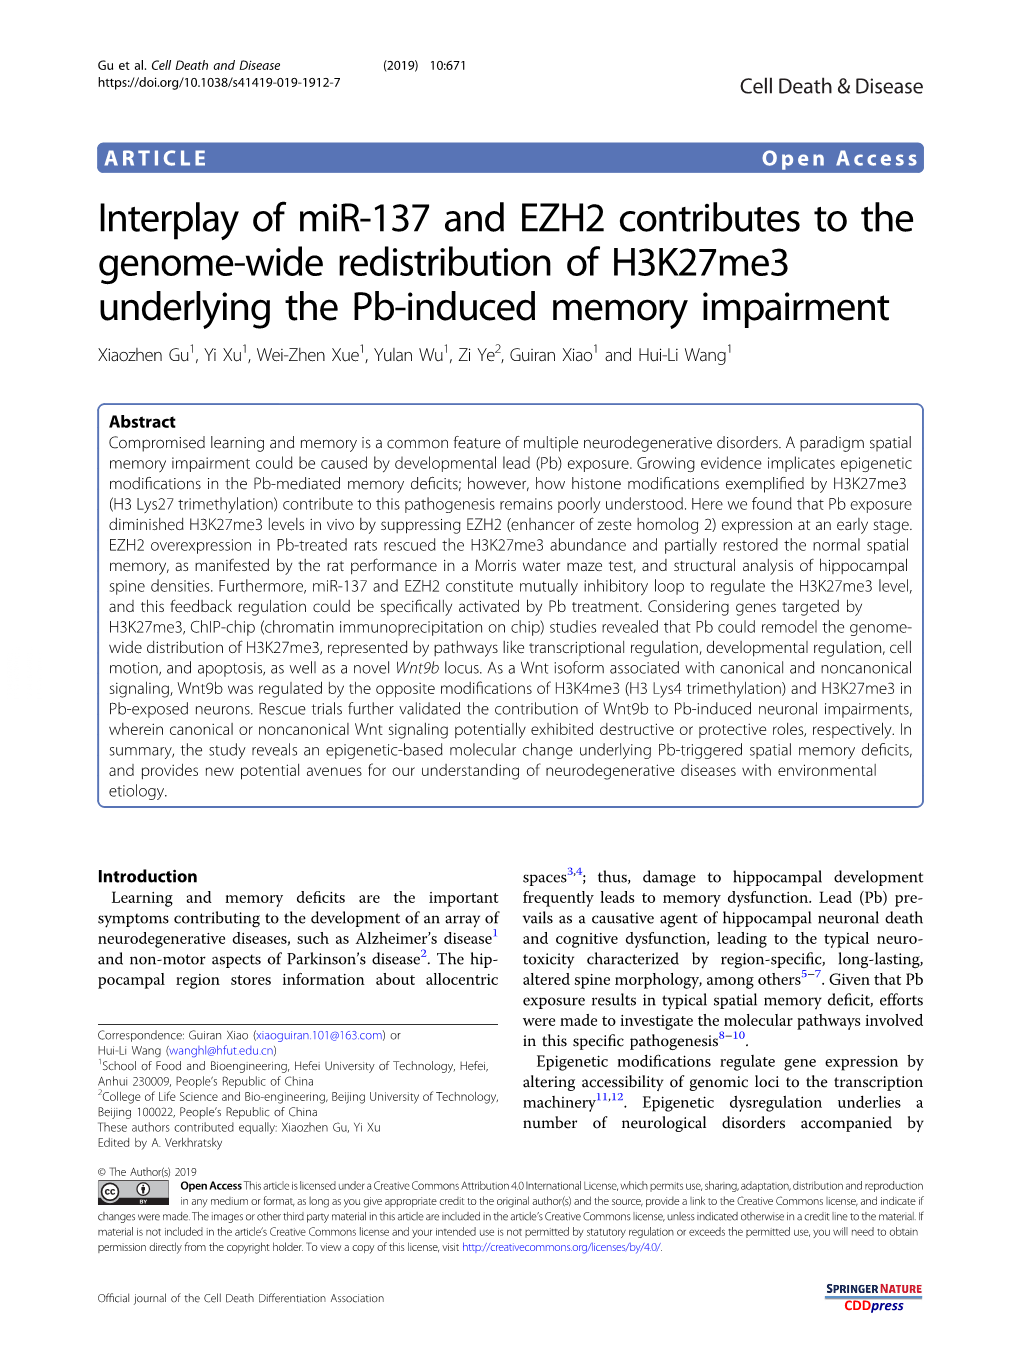 Interplay of Mir-137 and EZH2 Contributes to the Genome